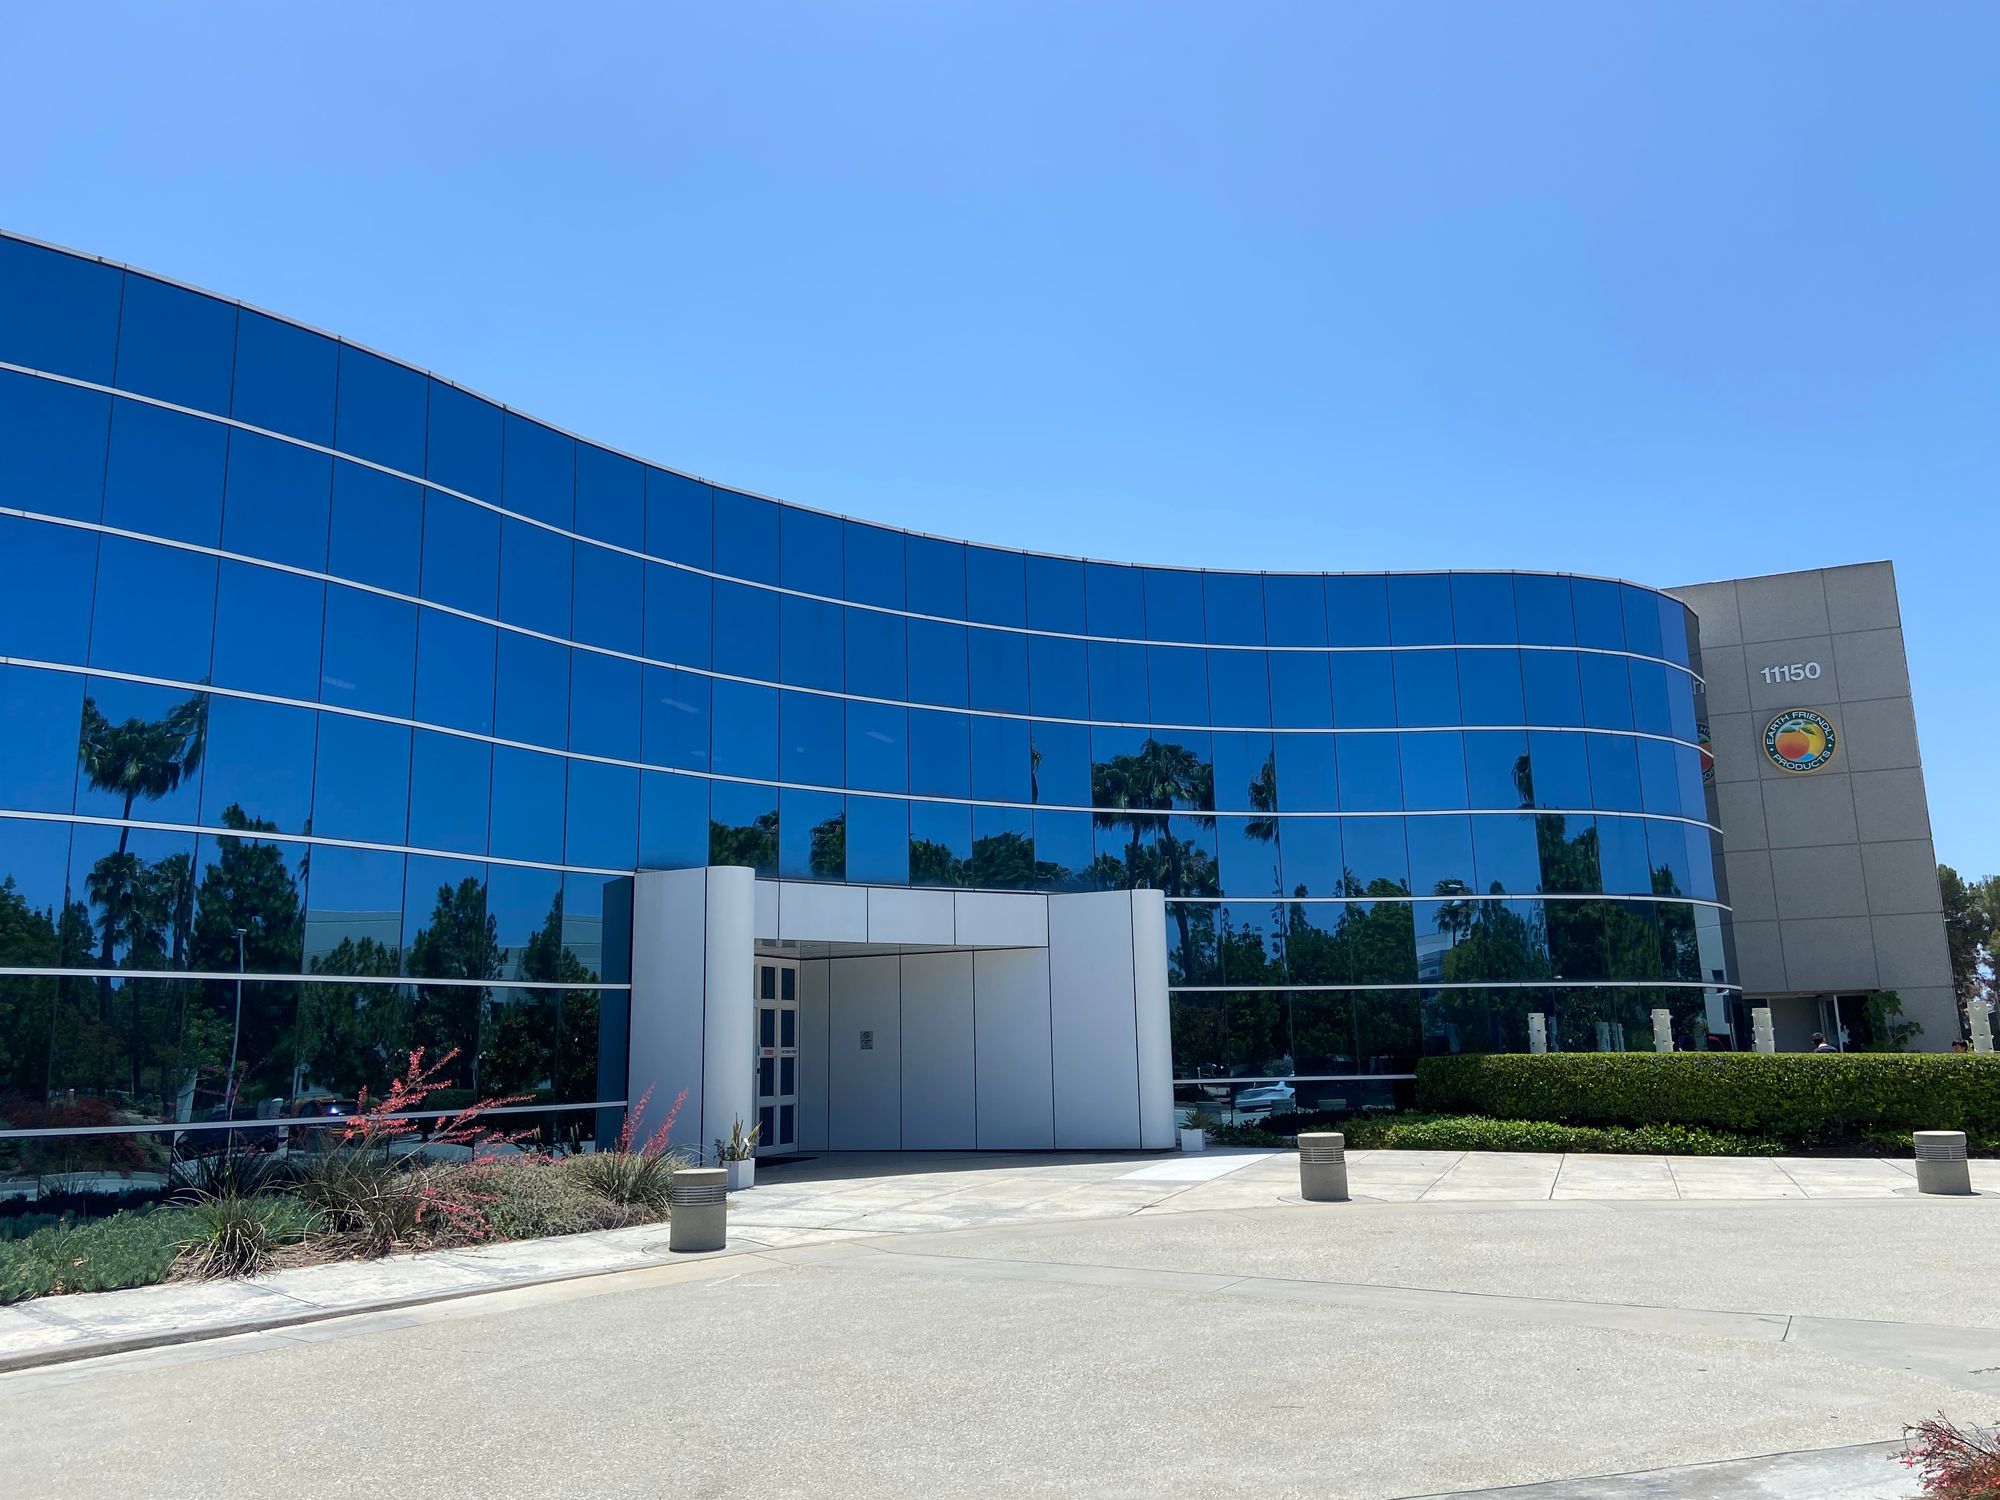 The exterior of the Ecos headquarters in Cypress, CA